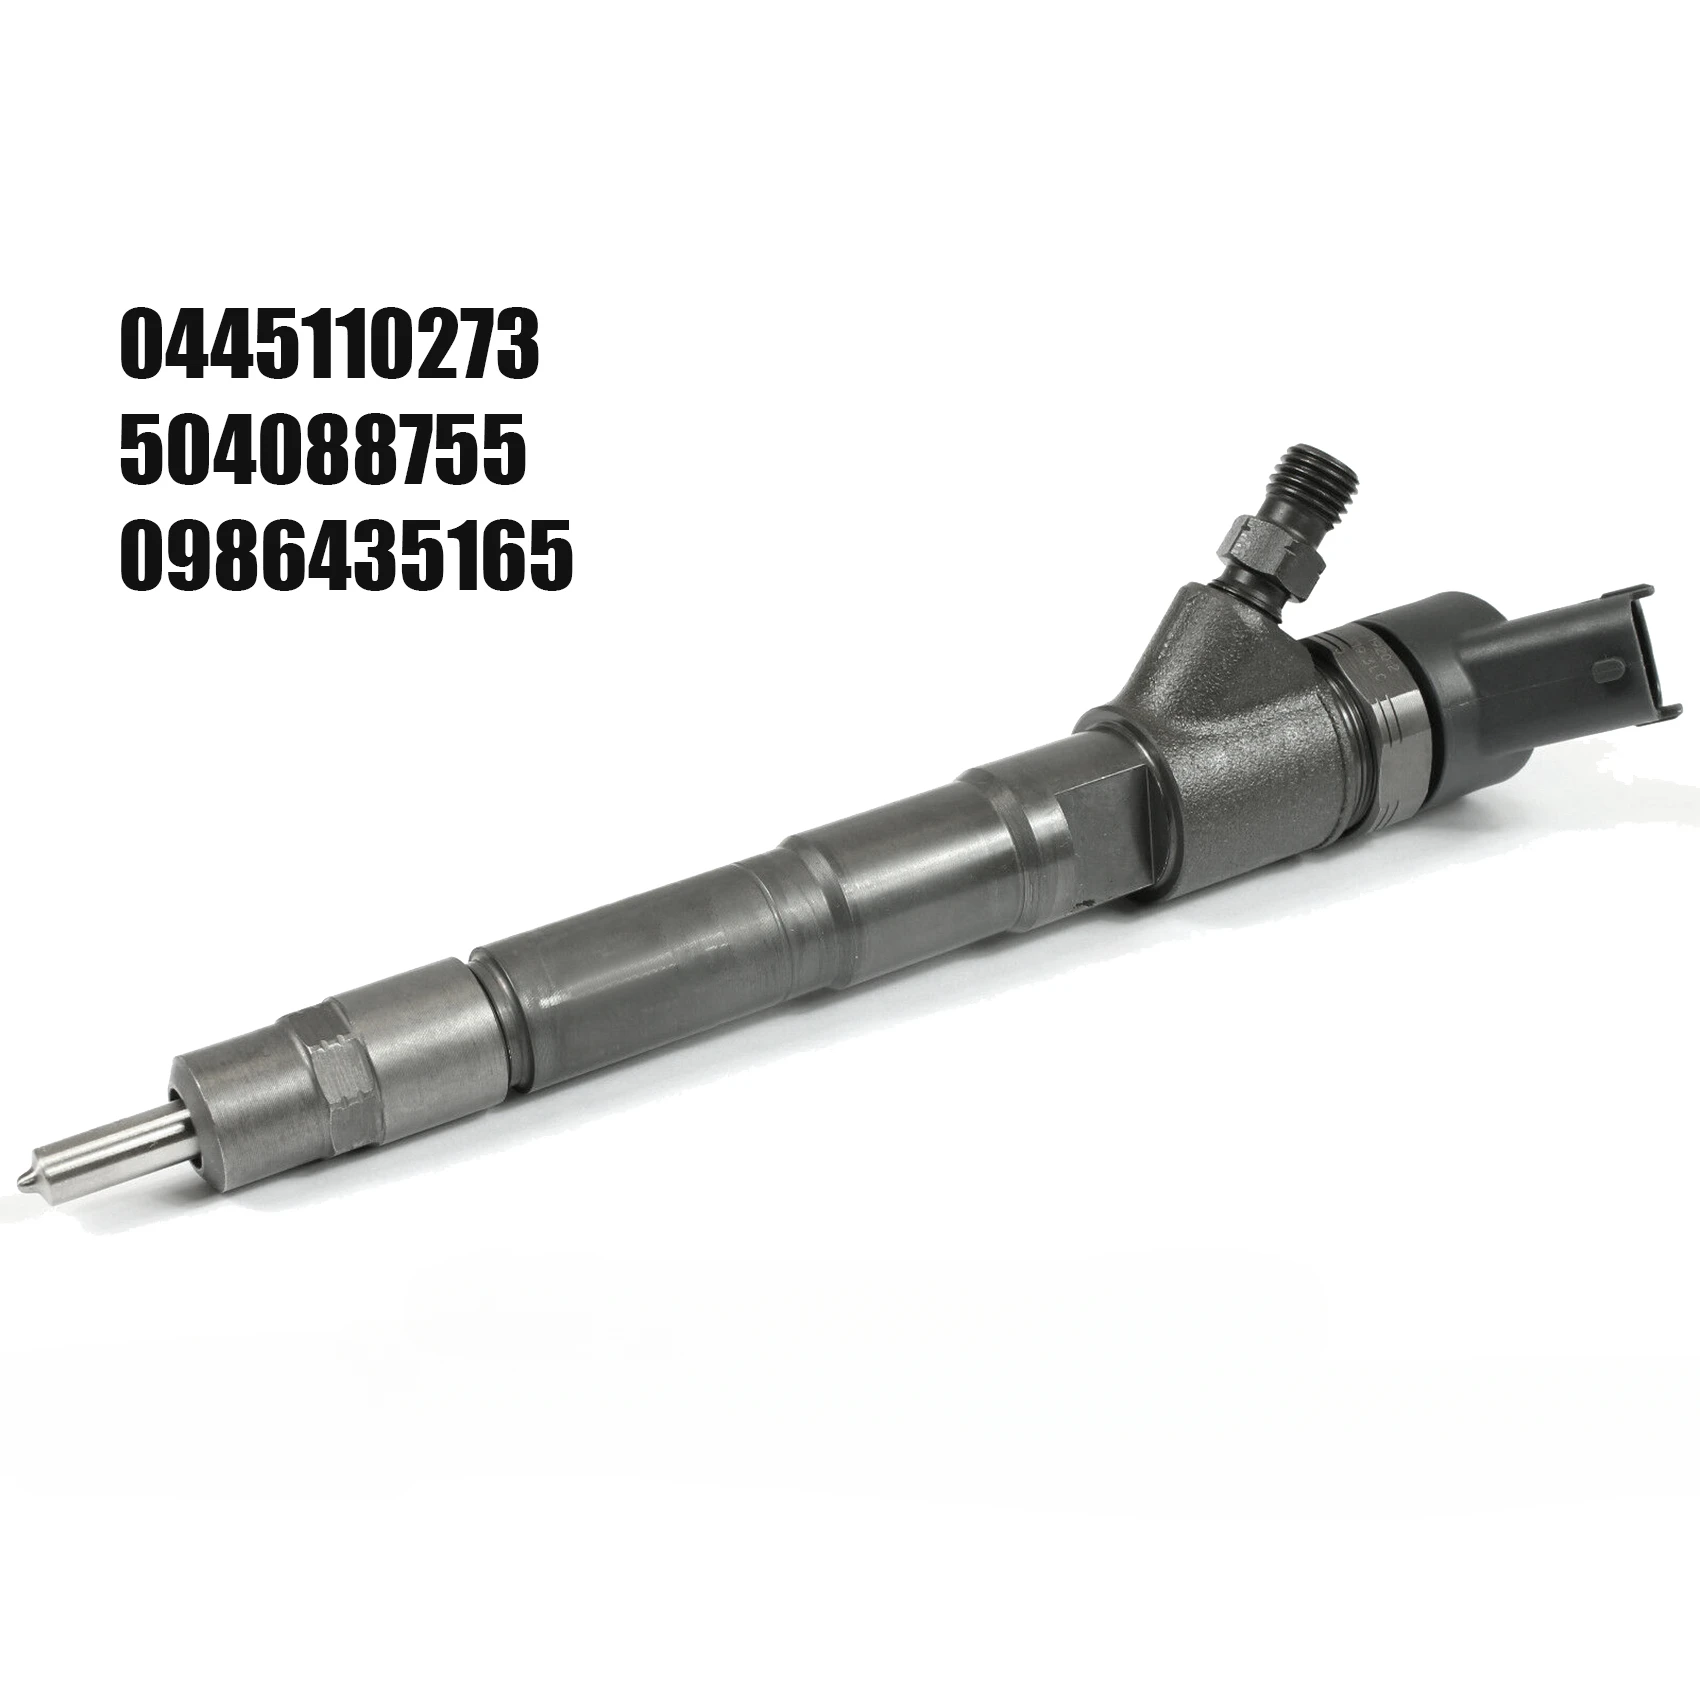 

0445110273 New Common Rail Fuel Injector 0986435165 for FIAT Ducato IVECO Daily 2.3 D 504088755 504377671